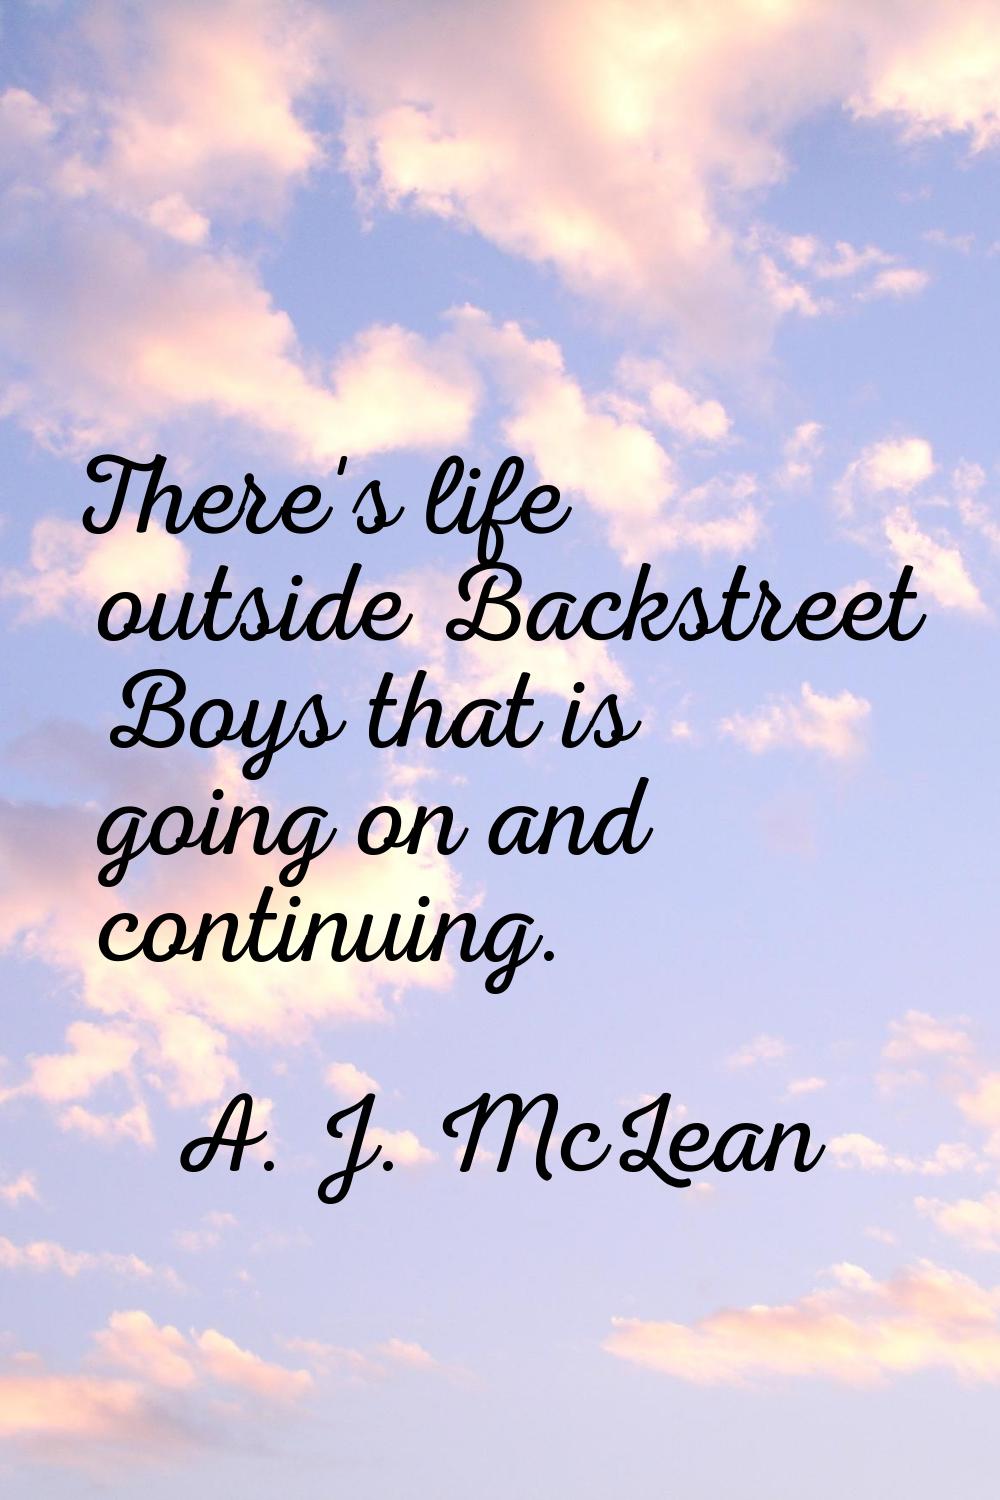 There's life outside Backstreet Boys that is going on and continuing.